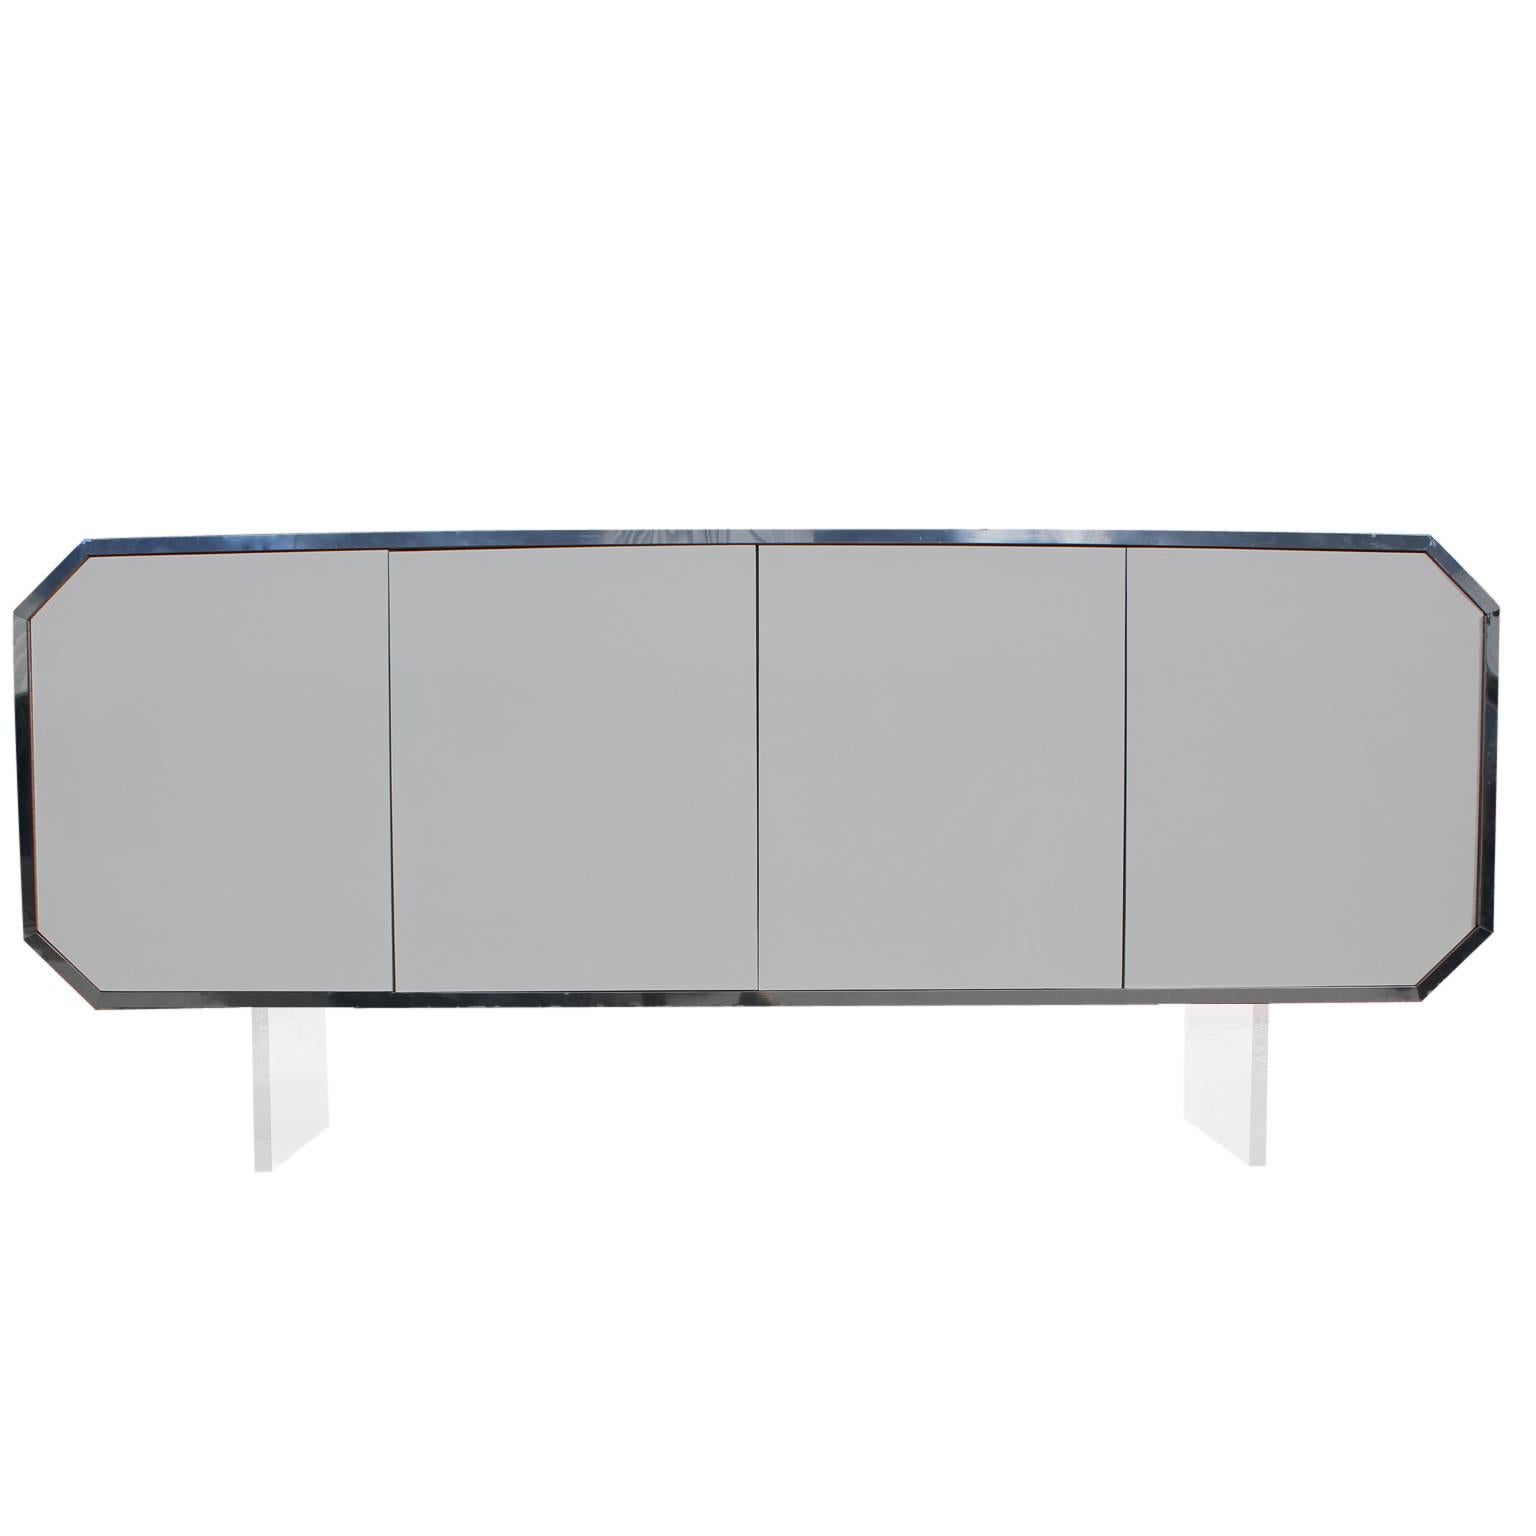 Stunning octagon shaped credenza with thick Lucite legs and chrome accents. The sideboard or cabinet was probably custom built in the 1970s. The chrome trim band gives the piece a wonderful finished detail. The inside includes a door and lots of